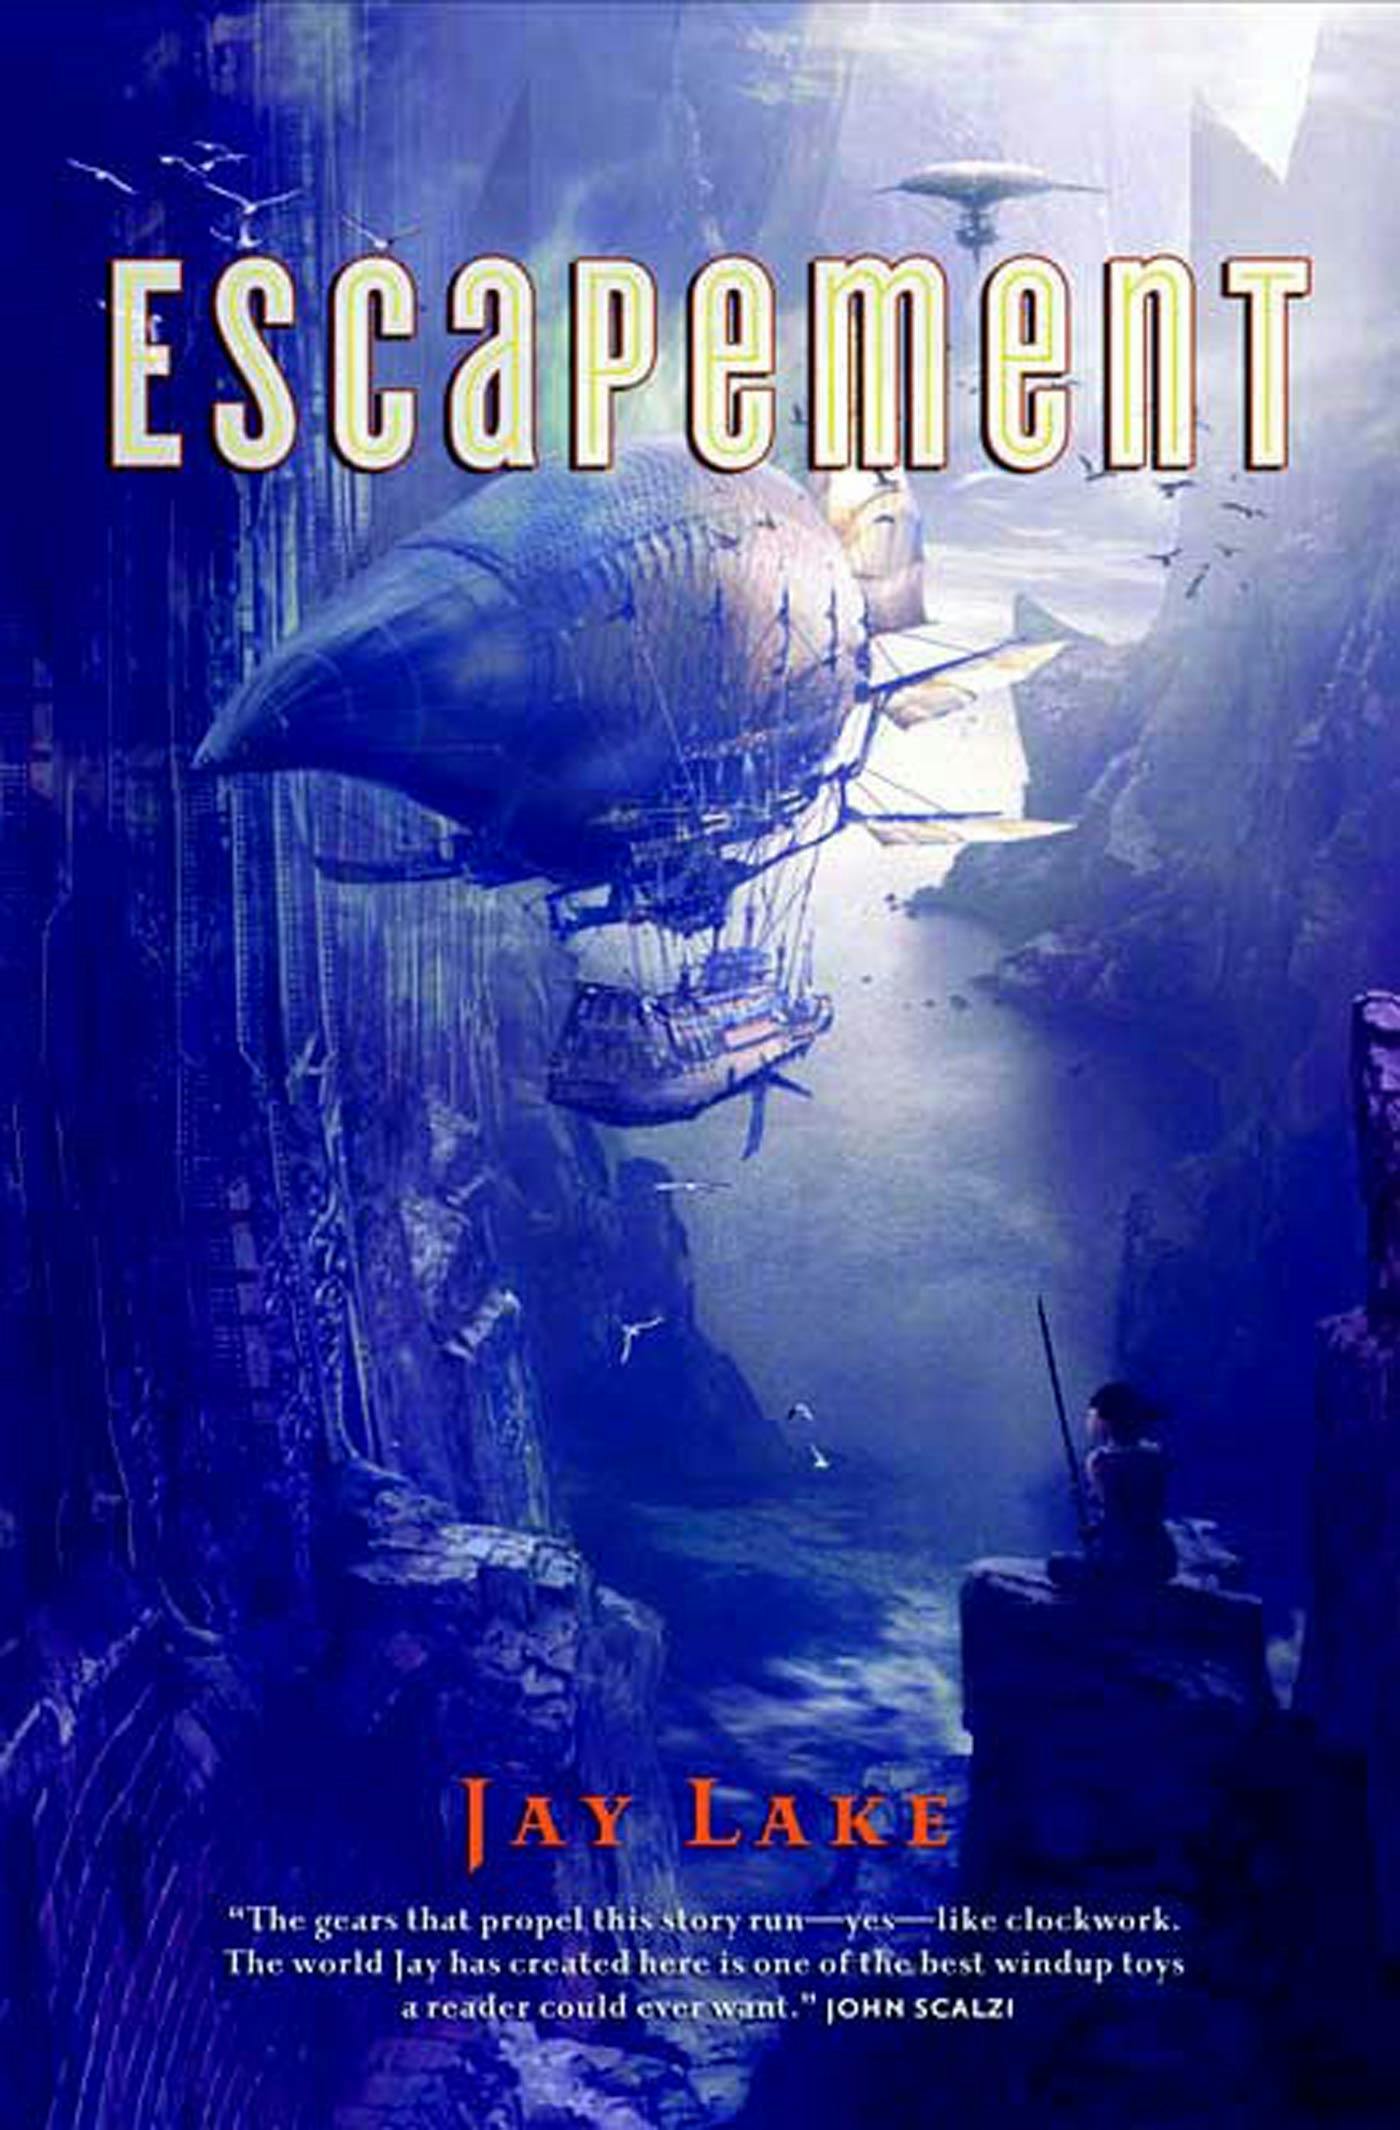 Cover for the book titled as: Escapement